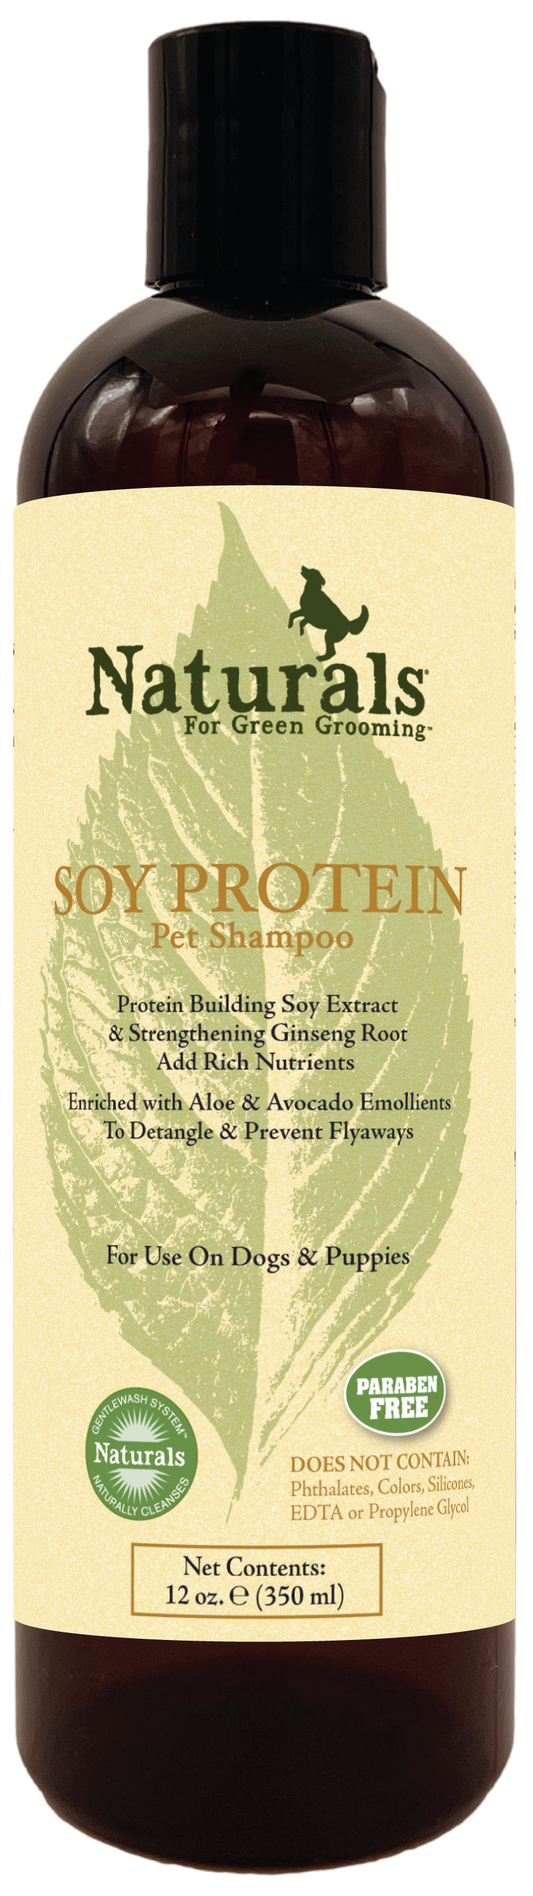 Soy Protein Pet Shampoo | Naturals™